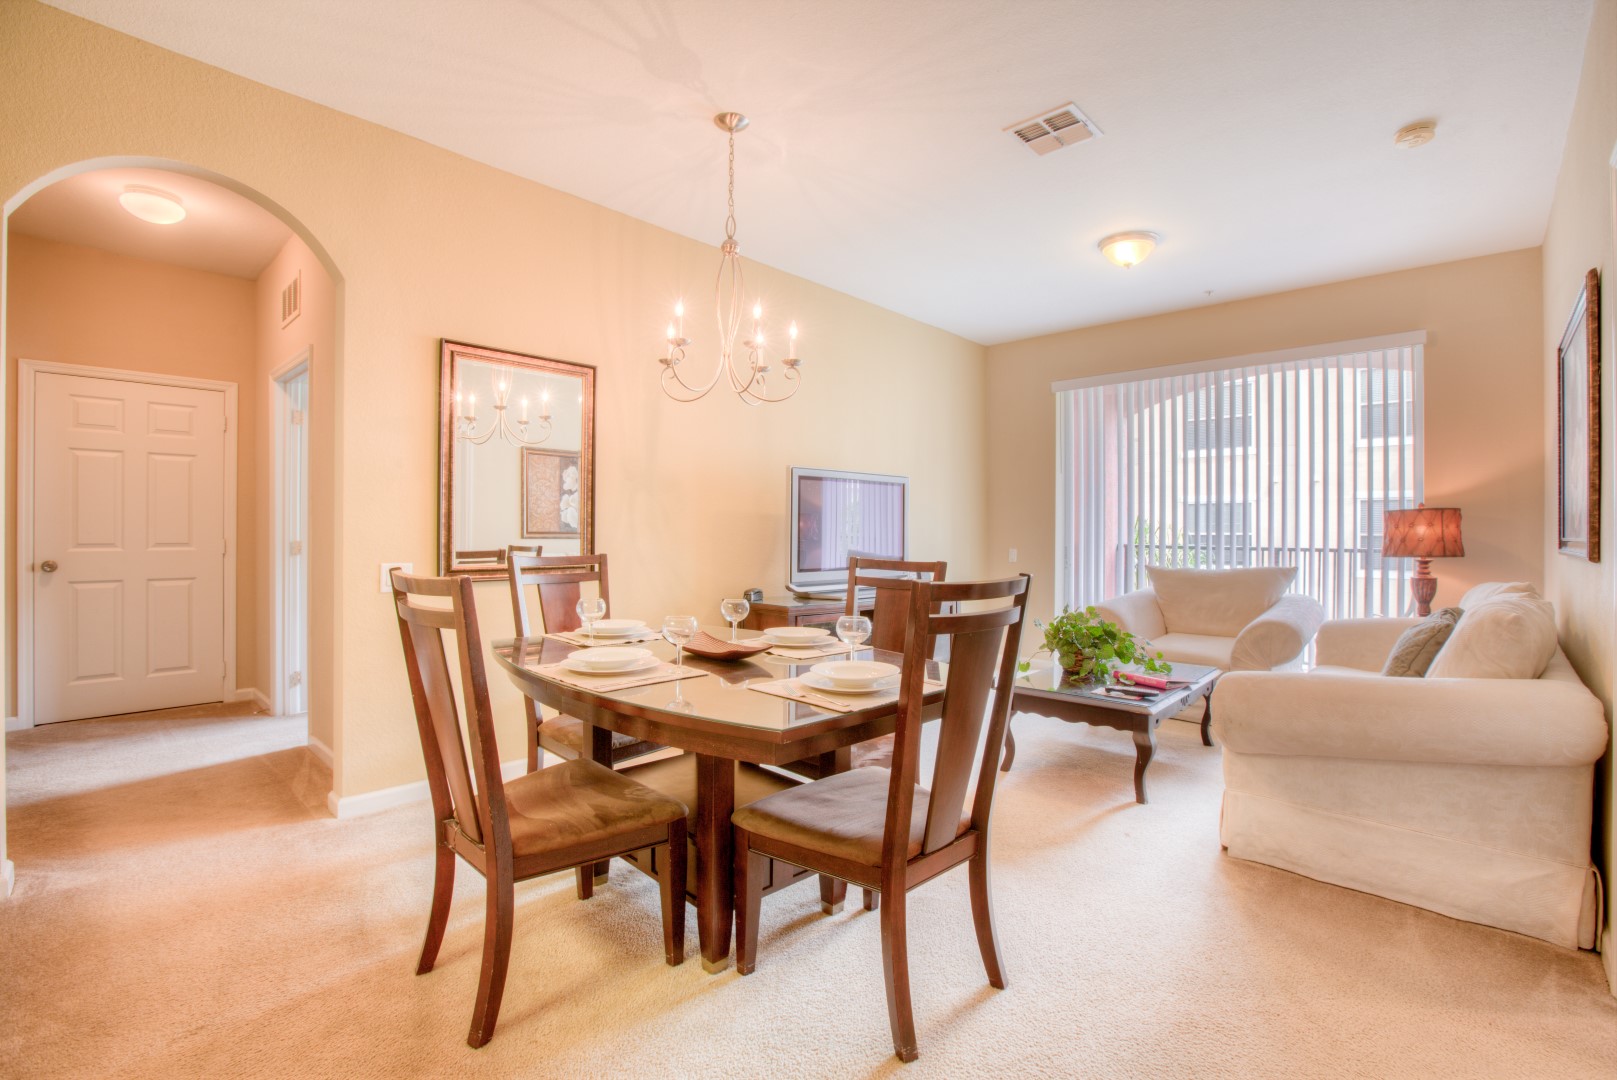 Lovely Dining Area of the Apartment in Orlando Florida Near Disney - Chic dining area featuring a stylish furnish - Gather the family for a memorable feast in our spacious dining area - Designed to accommodate 4 persons